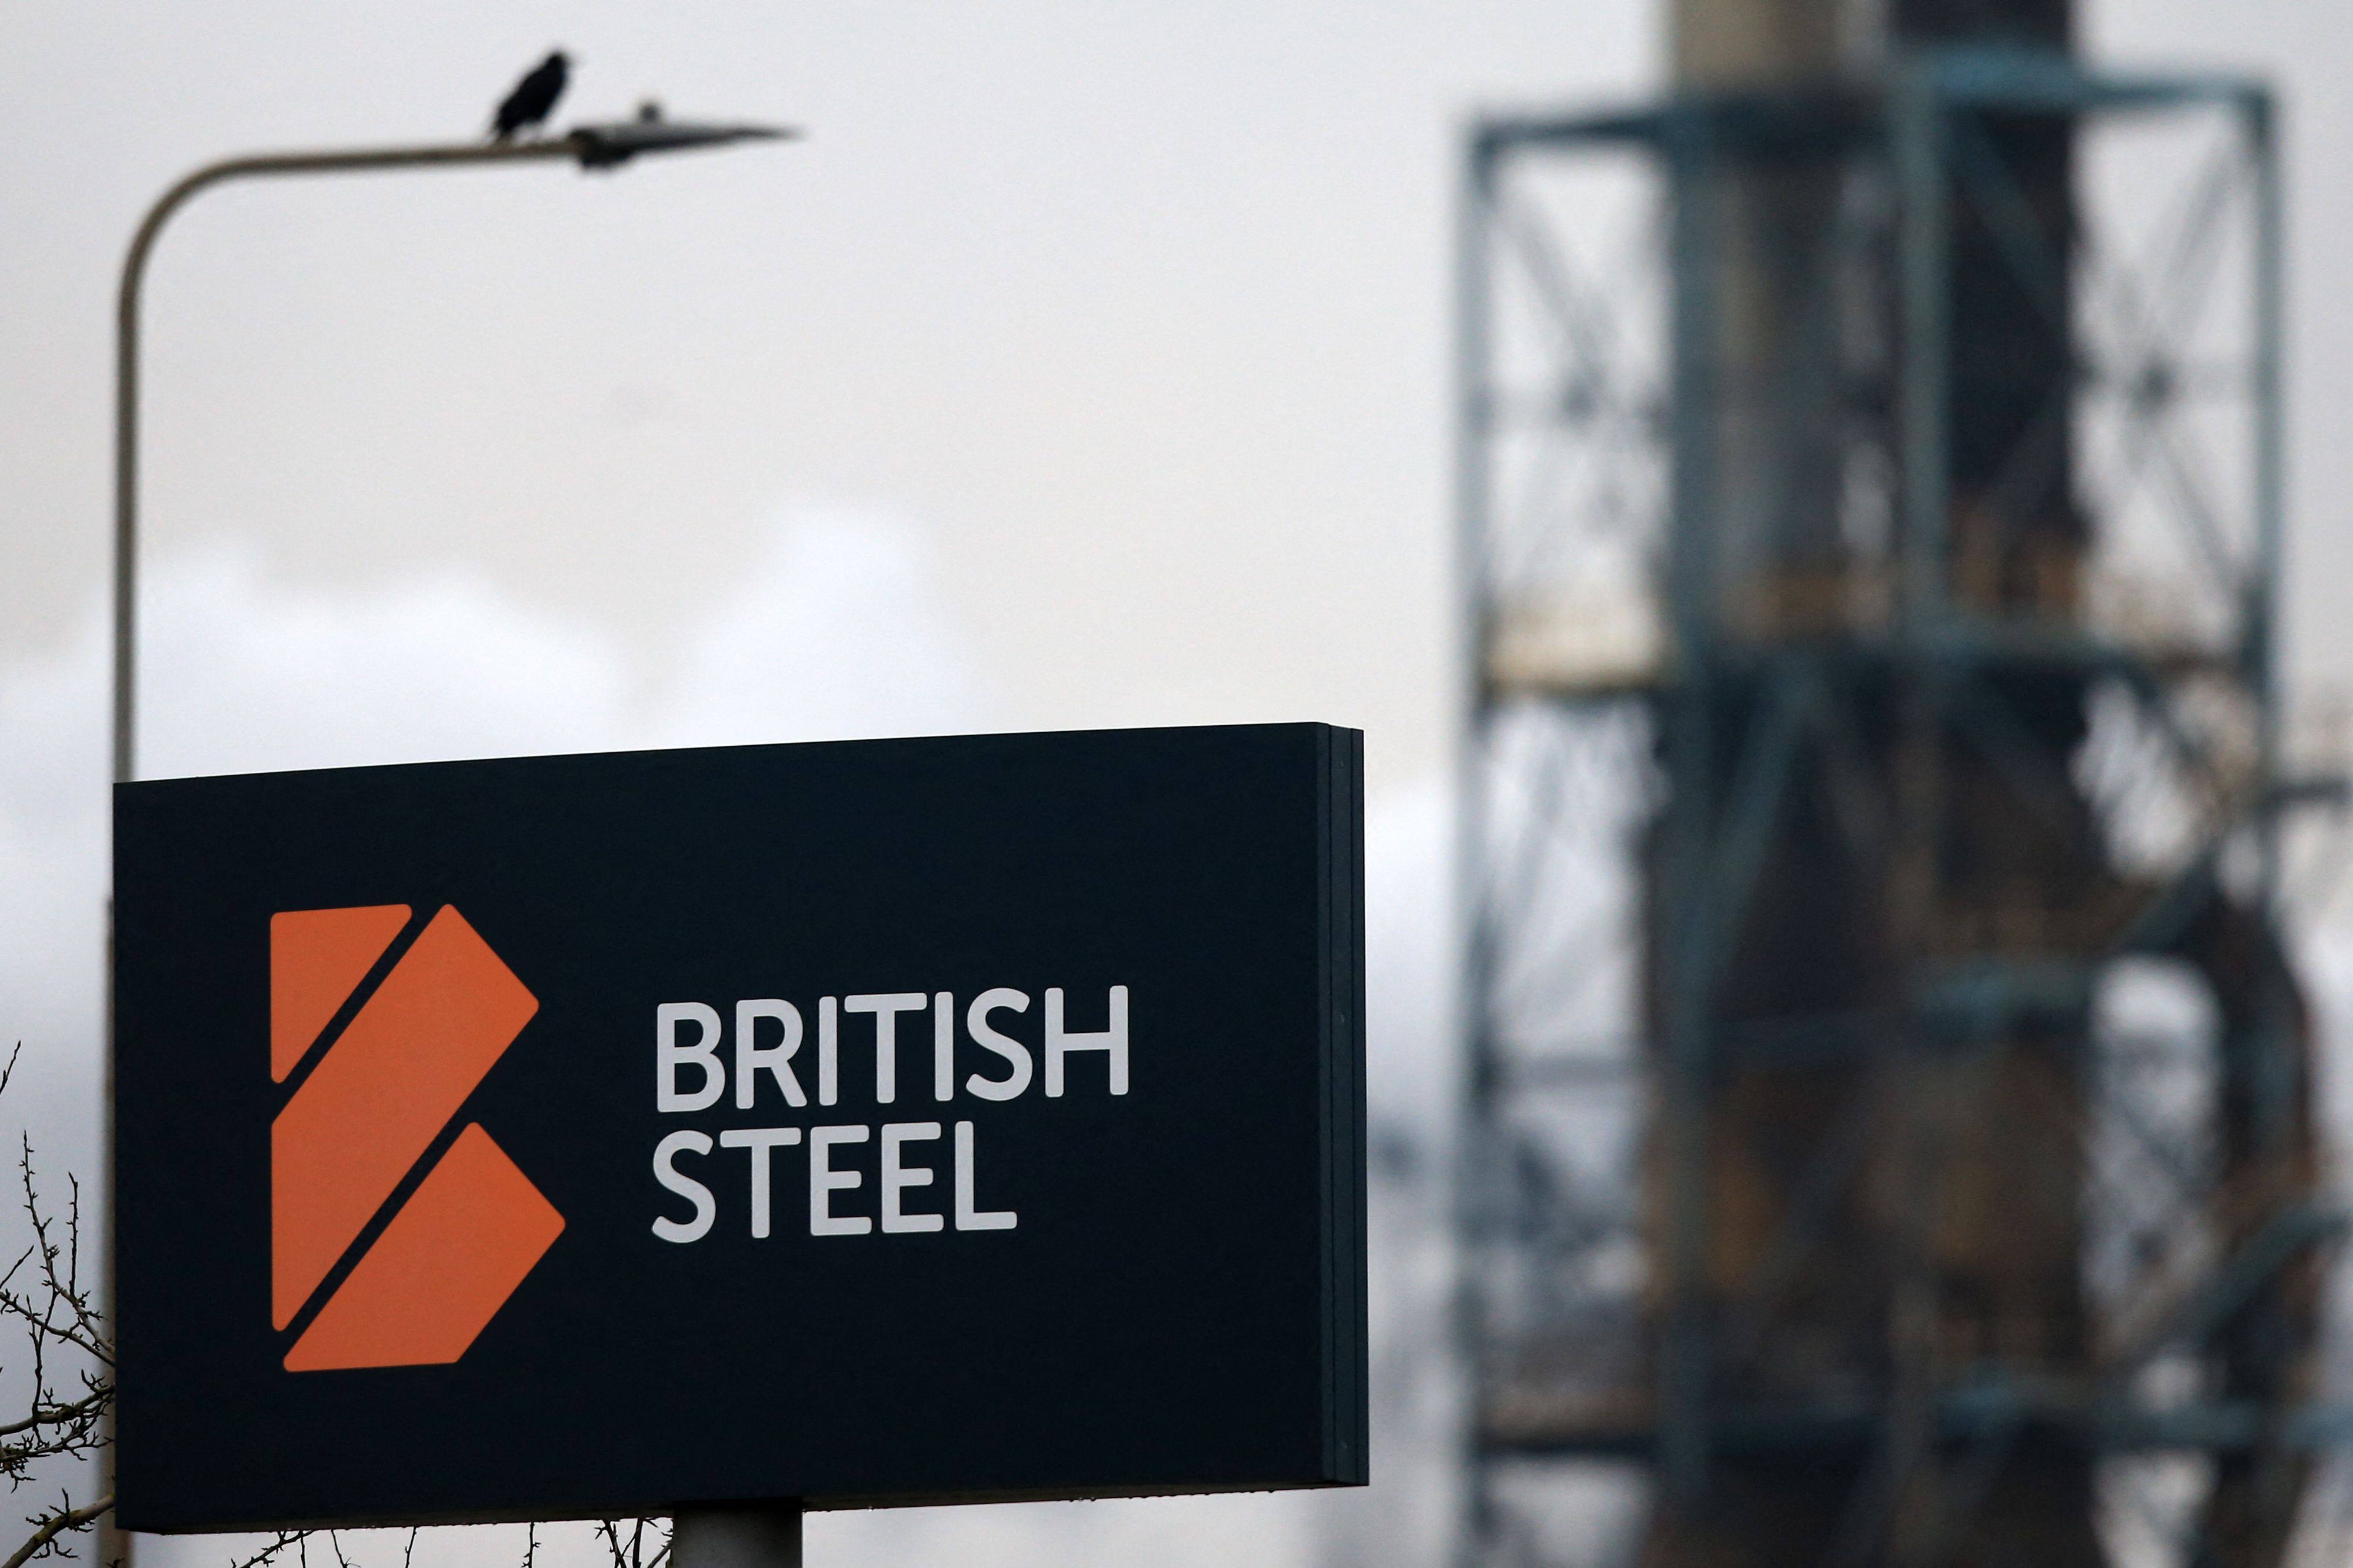 3,000 job losses planned at Tata Steel as company receives £500